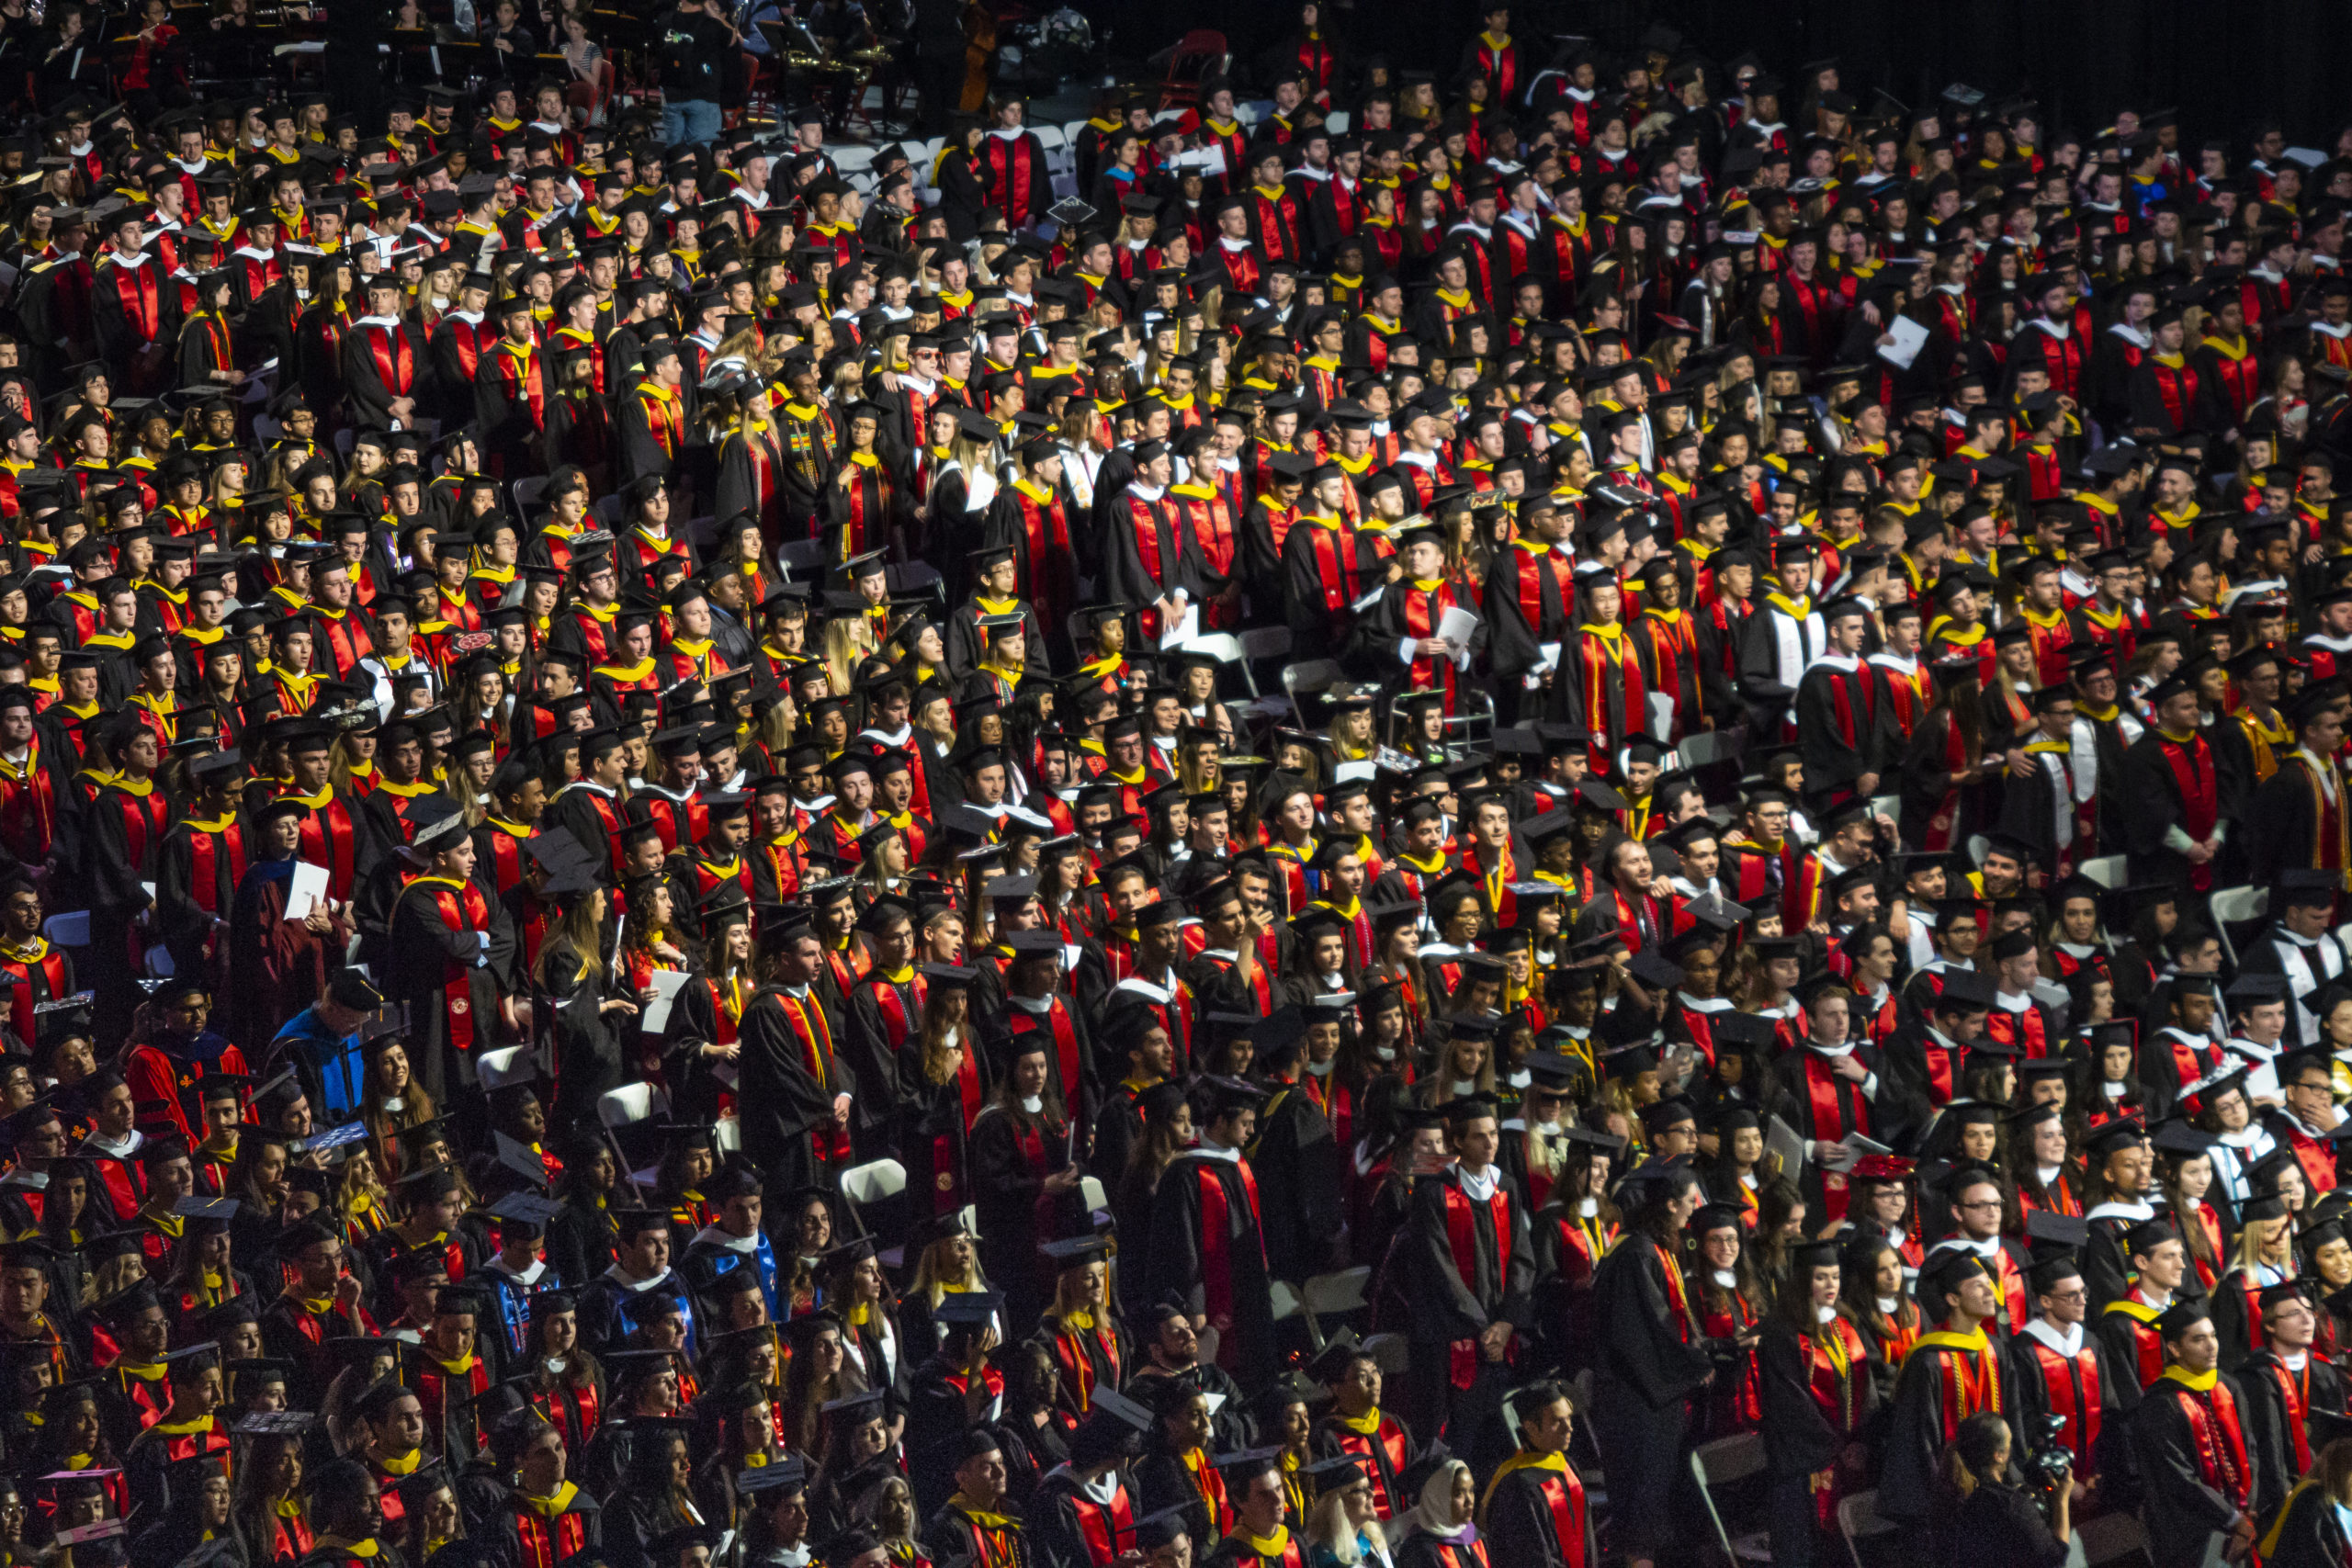 Aerial view of University of Maryland Commencement